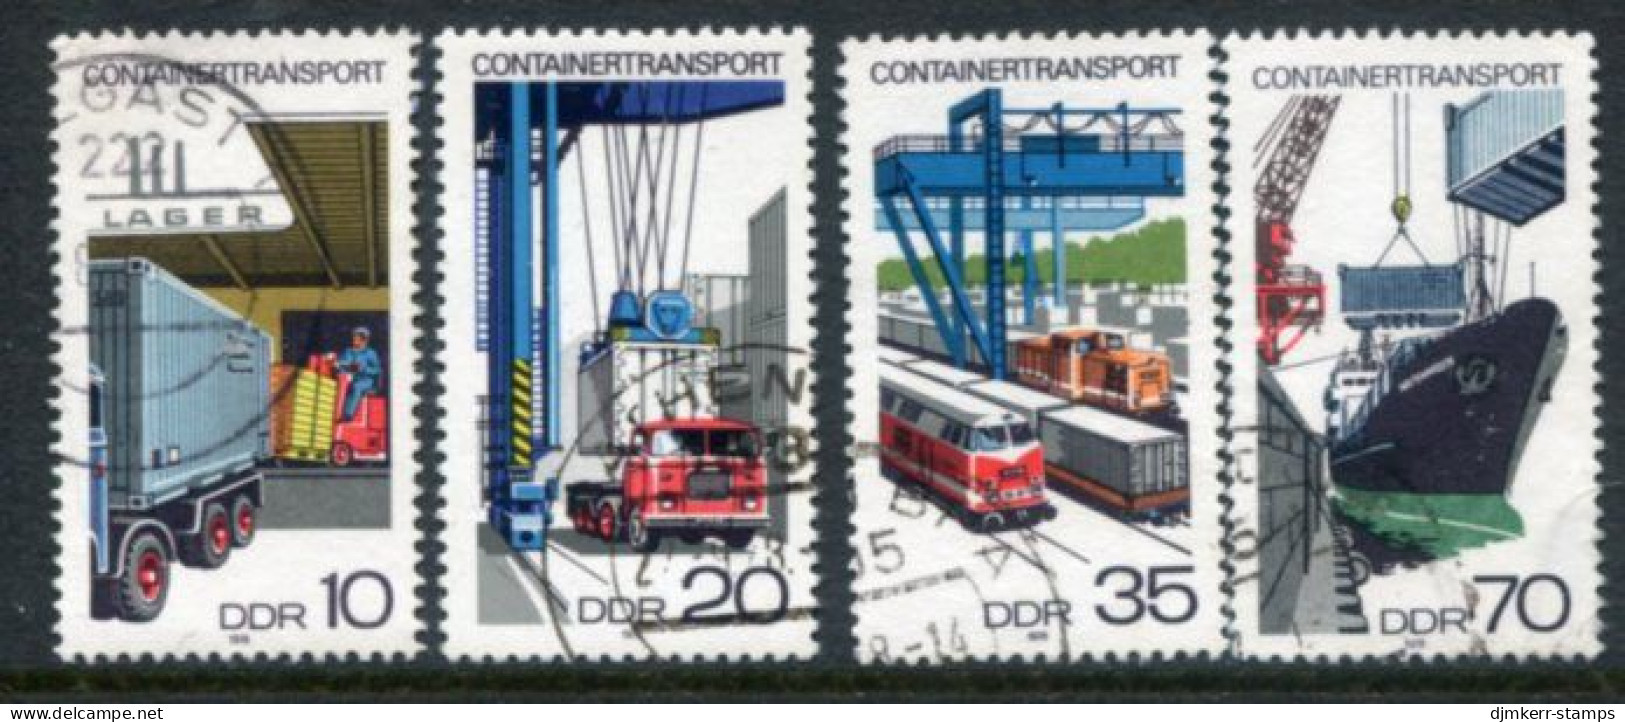 DDR / E. GERMANY 1978 Container Transport Used.  Michel 2326-29 - Usati